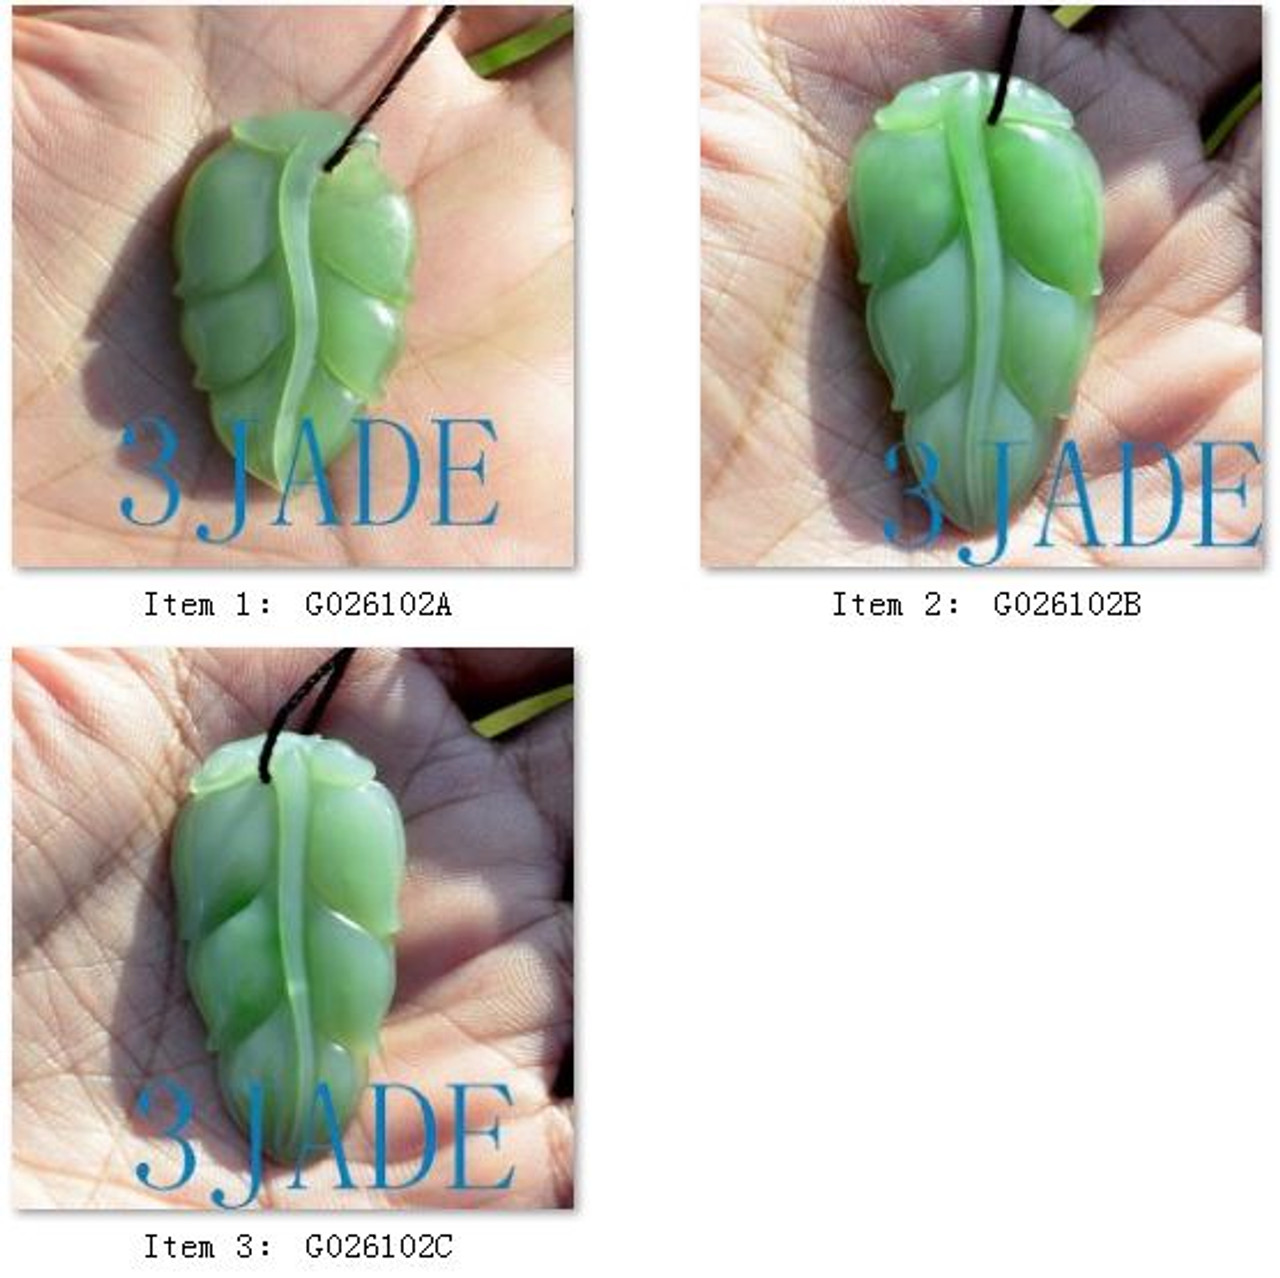 Hand Carved Natural Nephrite Jade Leaf Pendant / Carving -G025574 - 3JADE  wholesale of jade carvings, jewelry, collectables, prayer beads